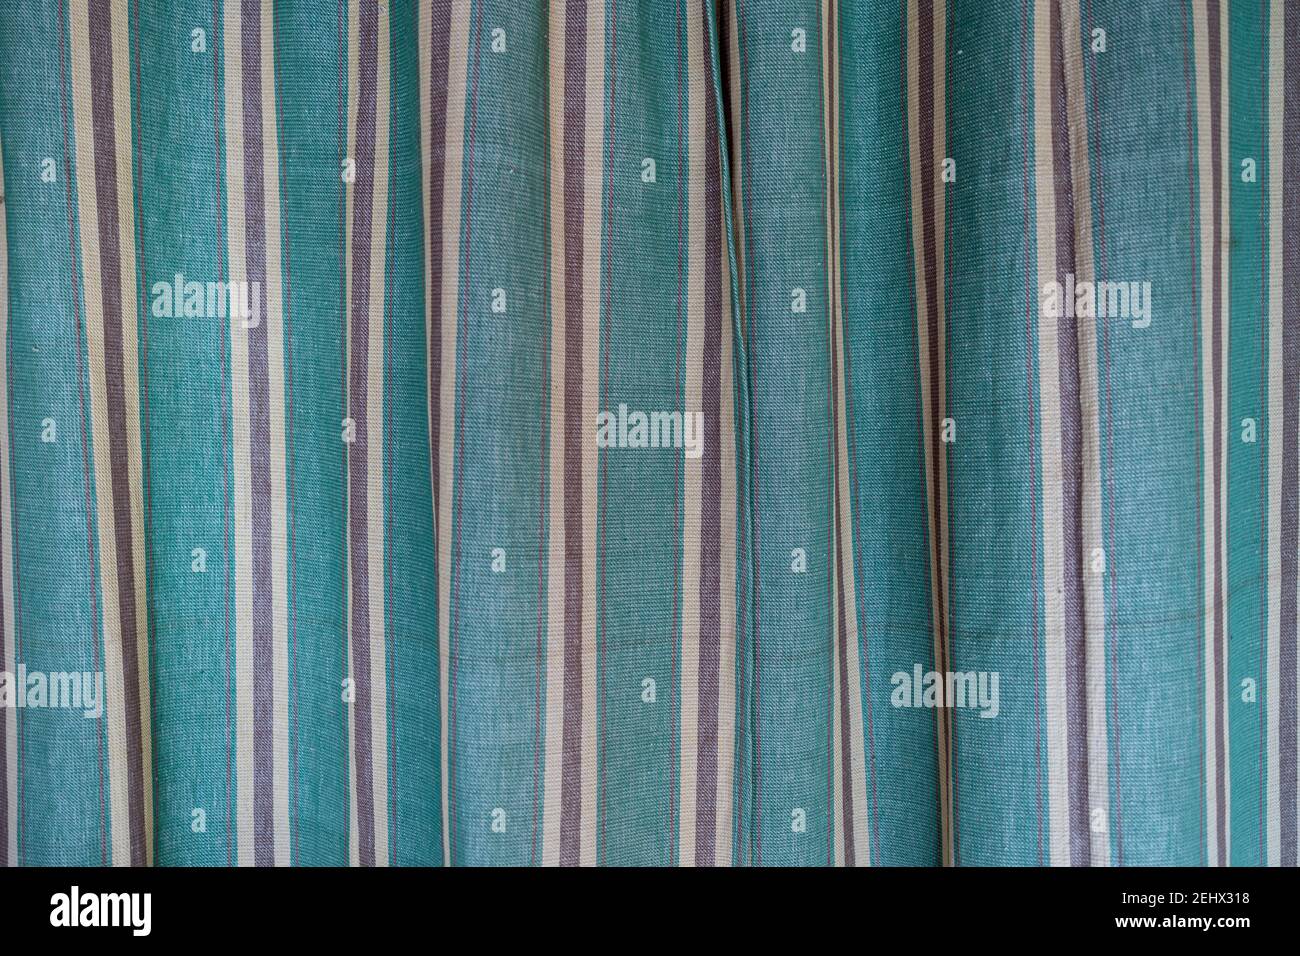 vintage green brown and white vertical striped fabric curtain Stock Photo